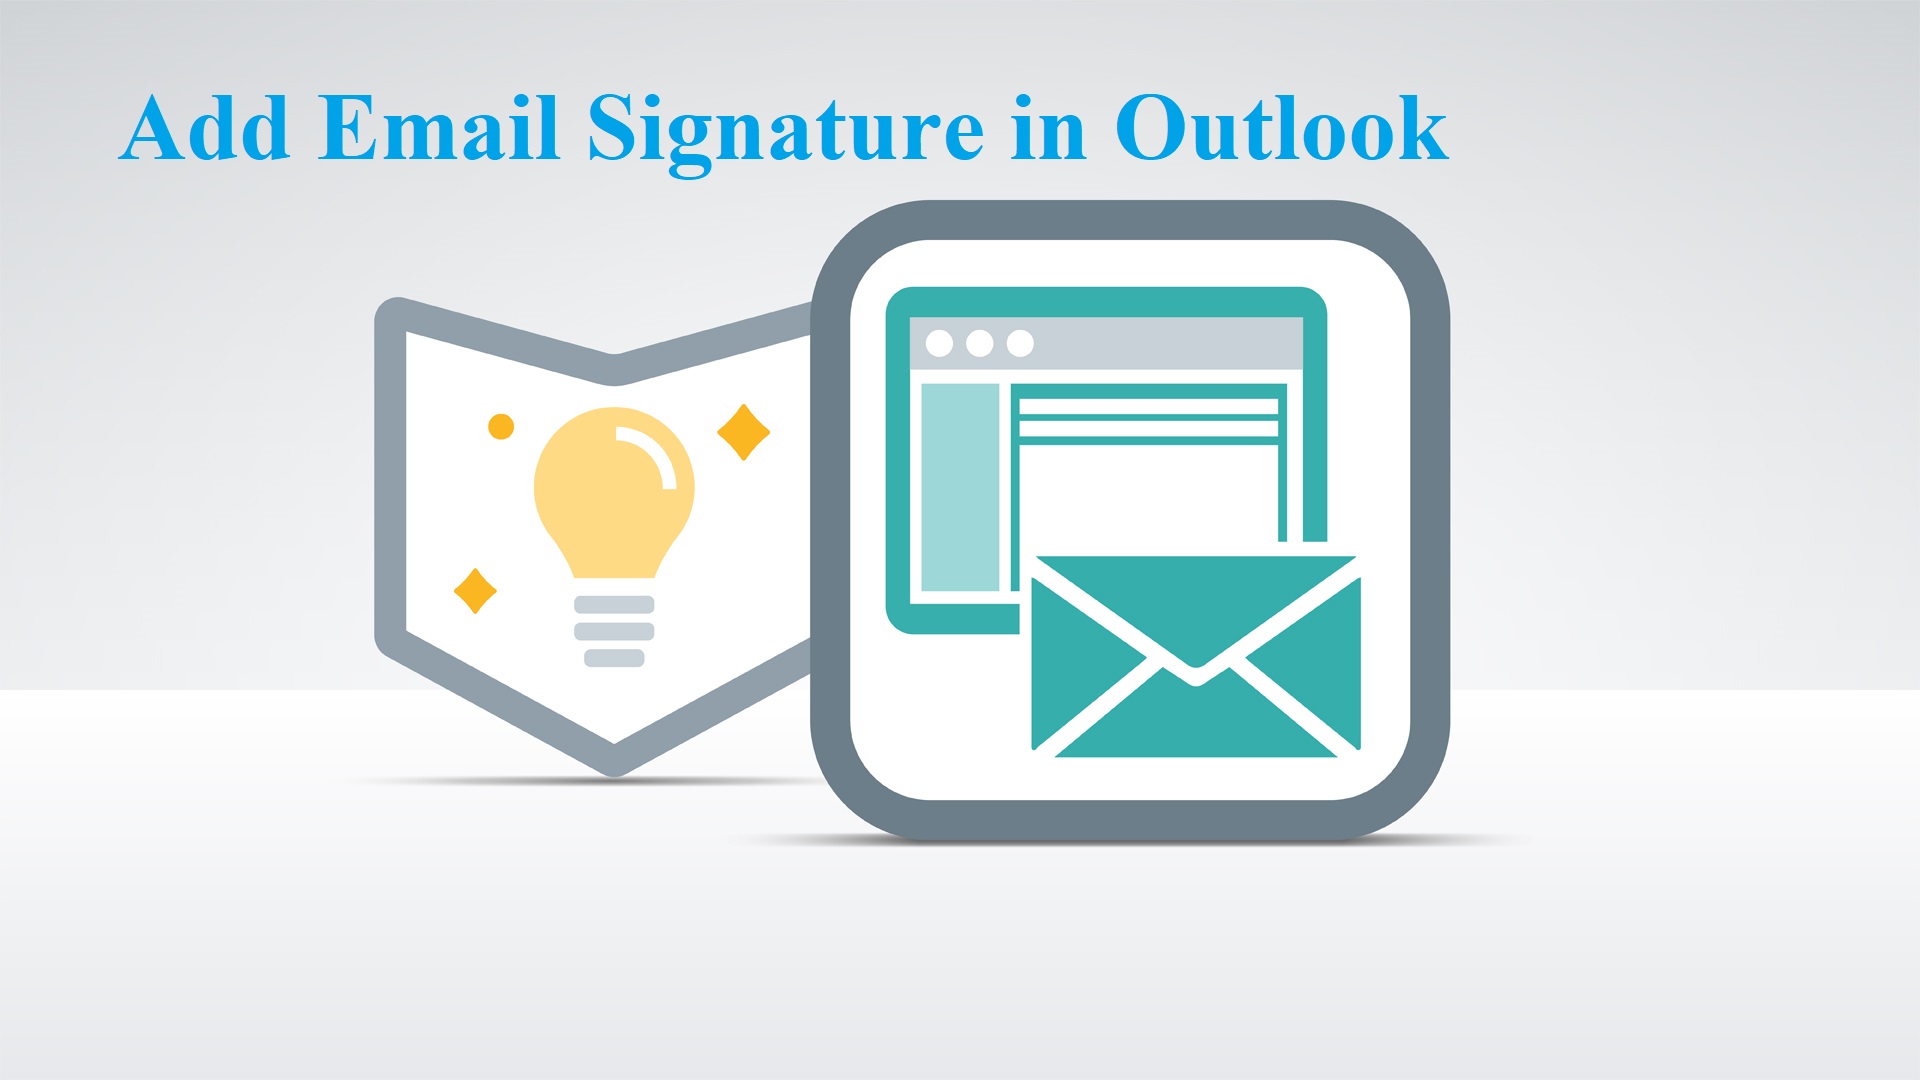 how to add signature to every email in outlook 2010